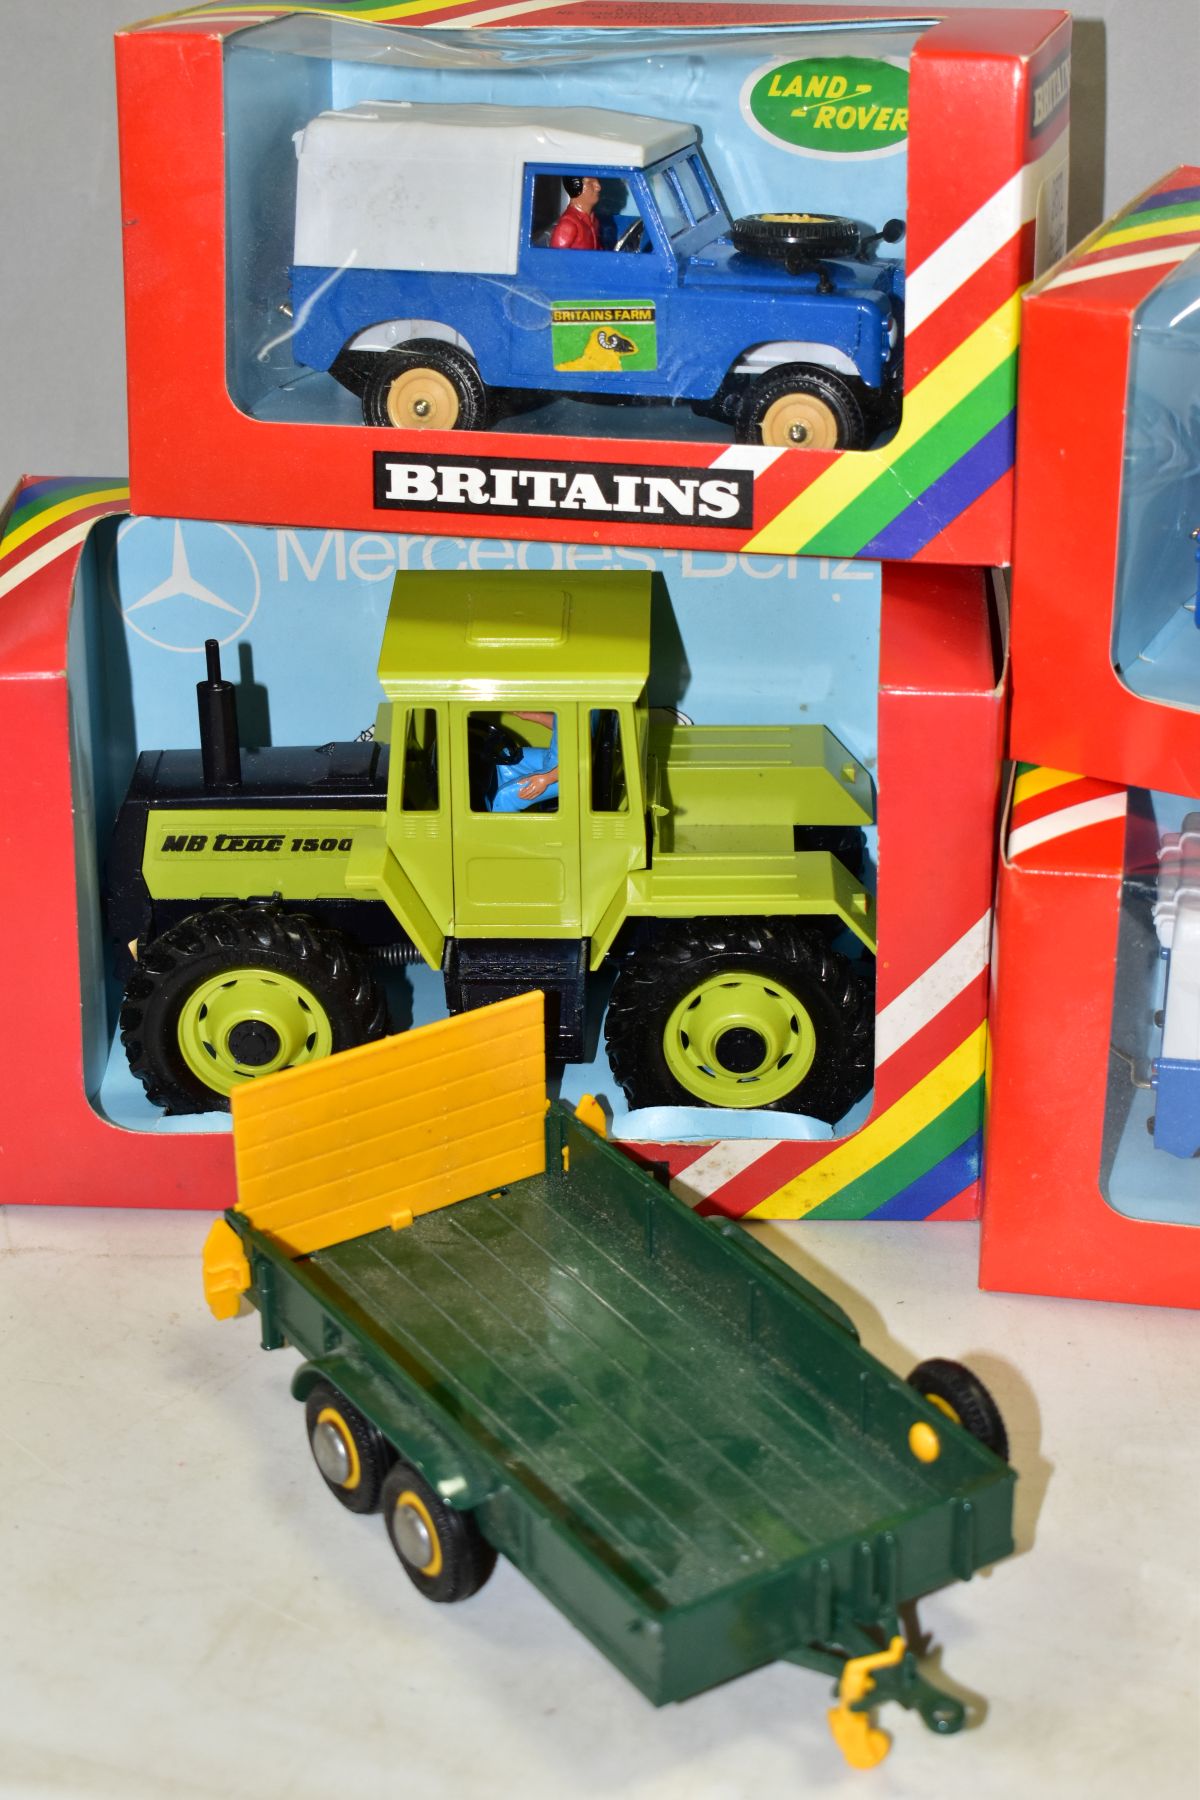 THREE BOXED BRITAINS FARM LAND ROVER MODELS, No.9571, appear complete and look to have hardly - Image 3 of 3